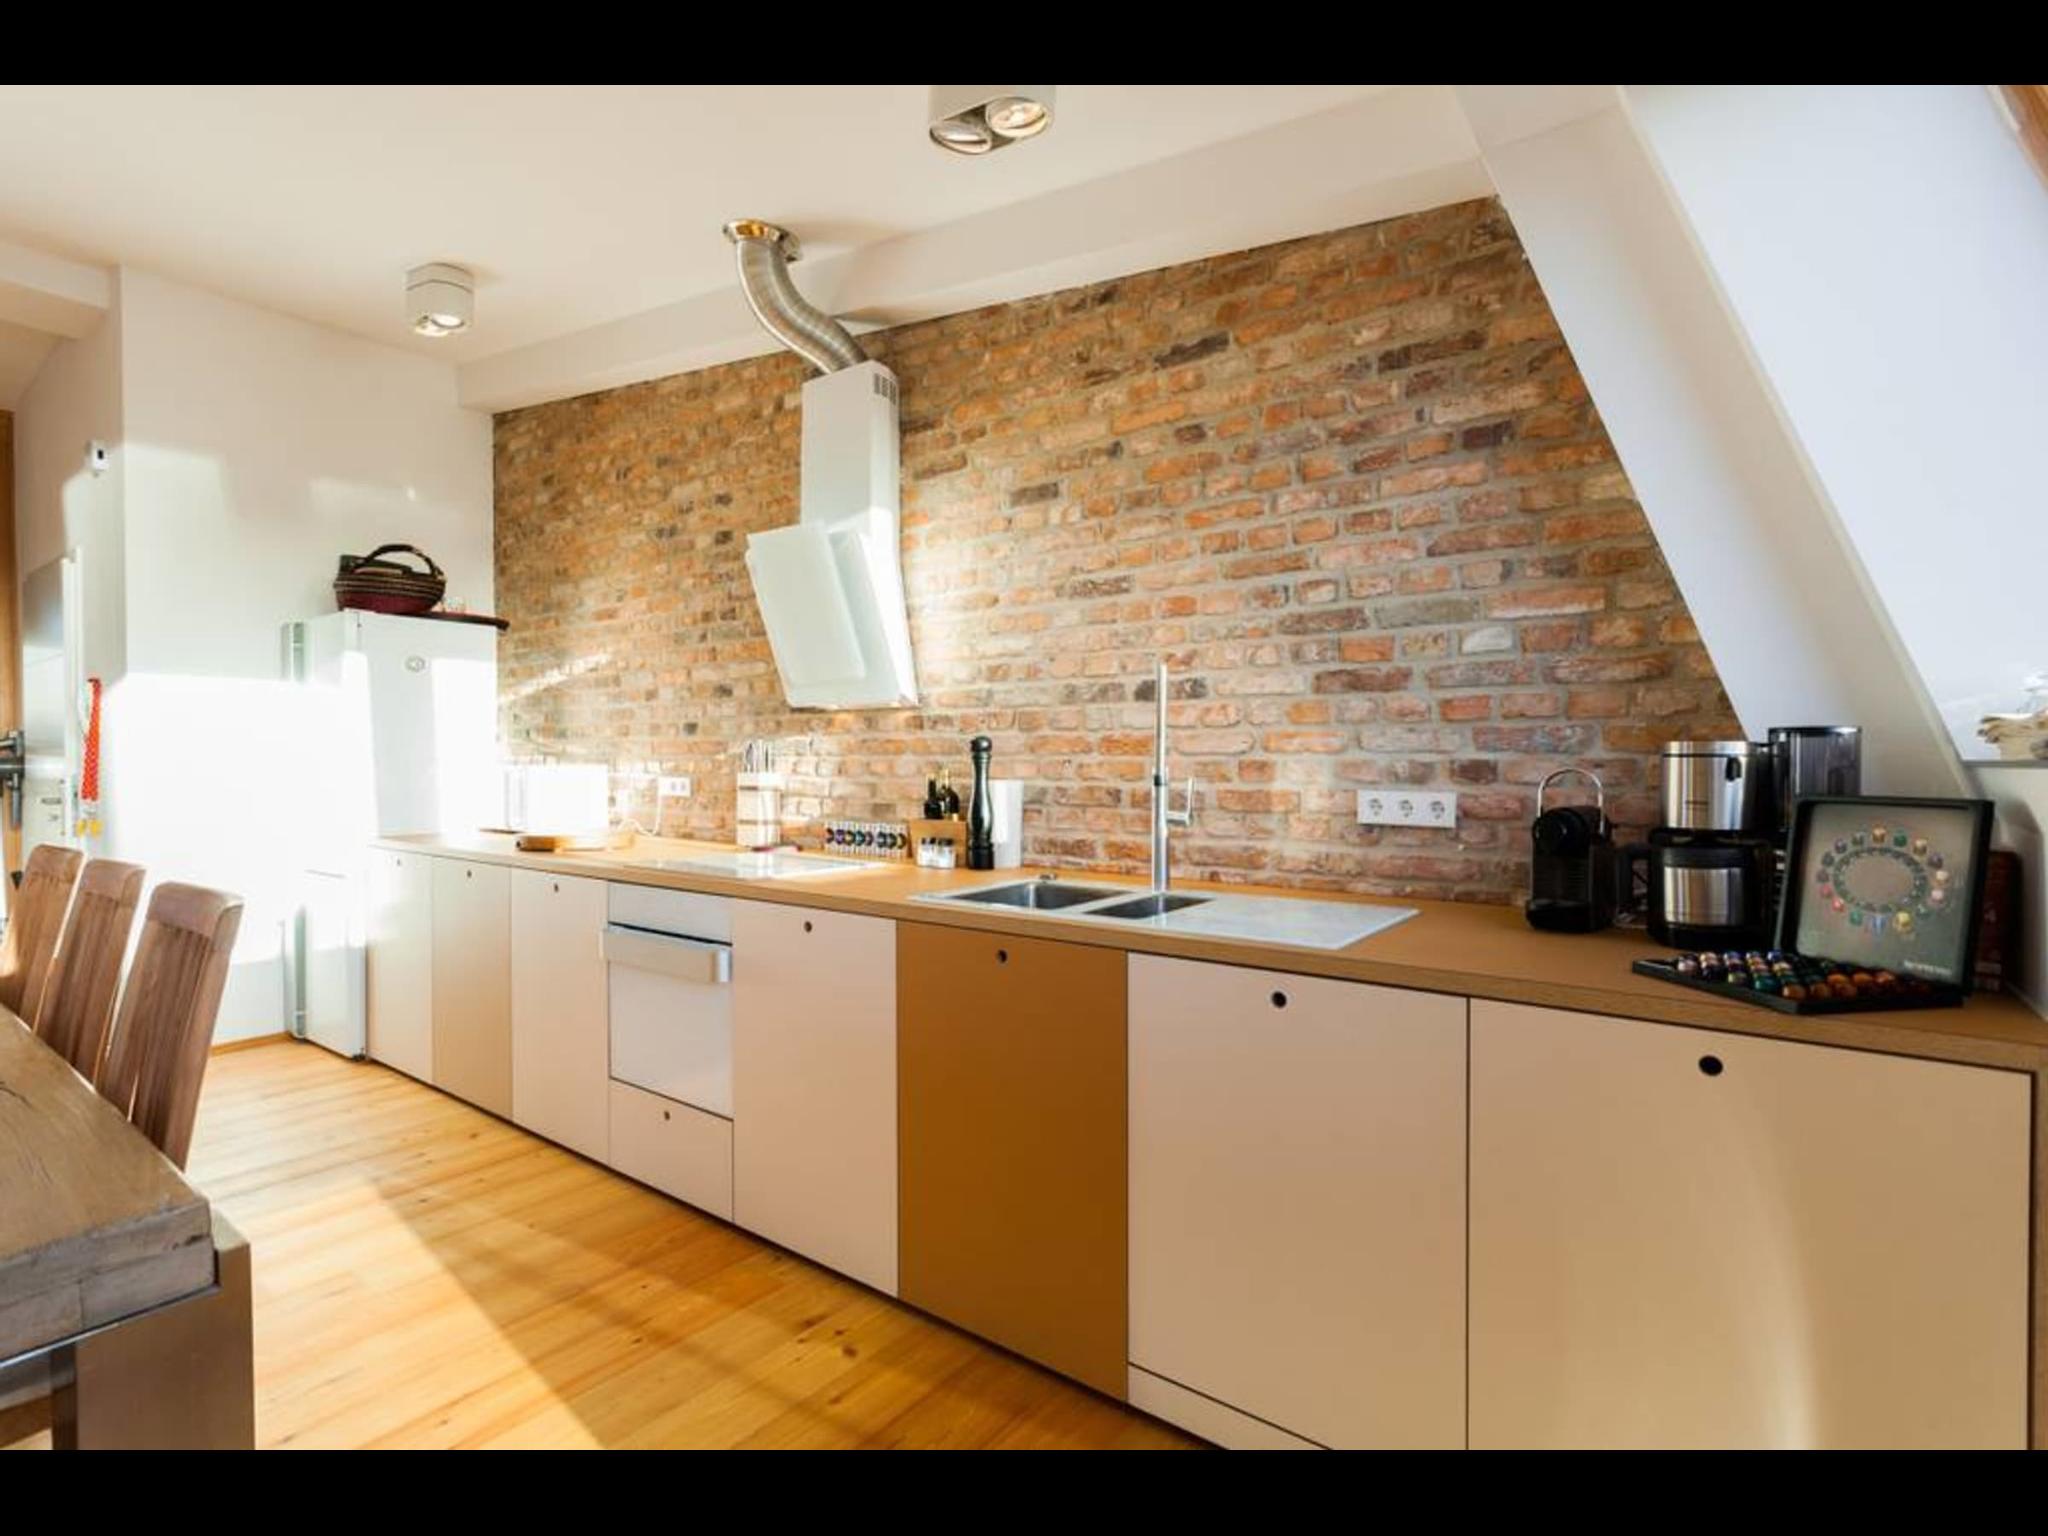 Perleberger - Luxury furnished apartment in Berlin